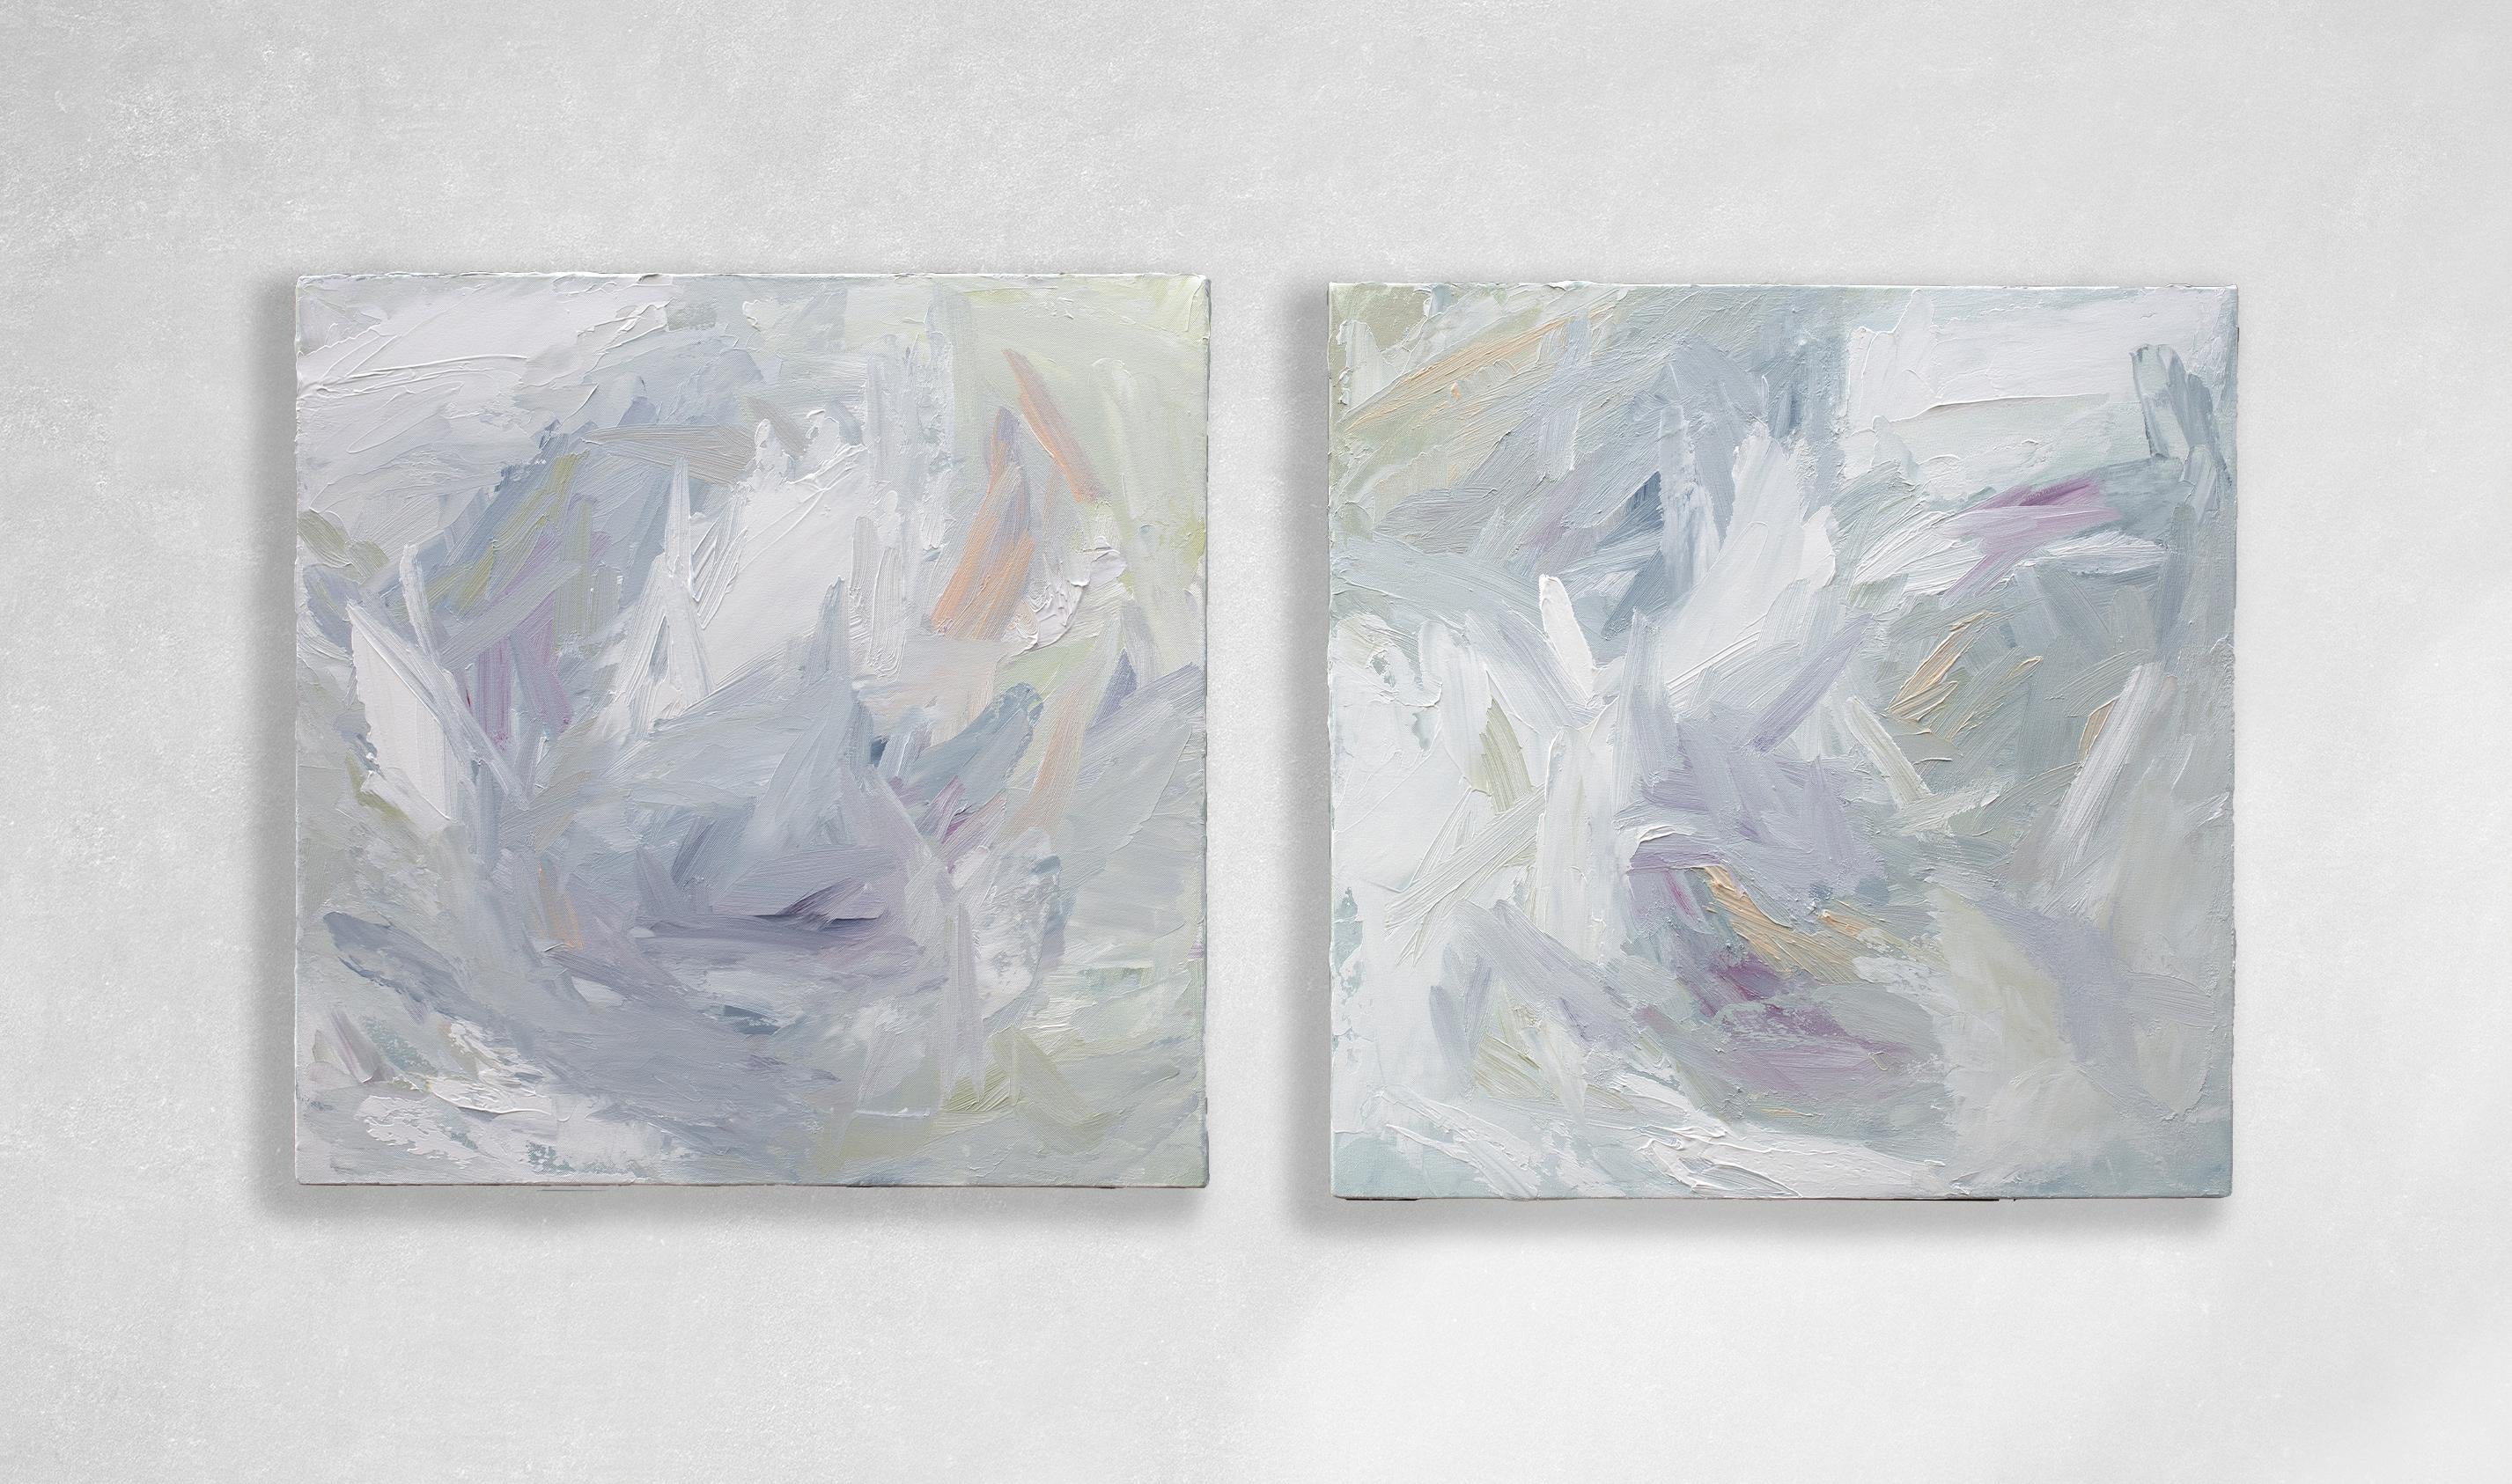 Teodora Guererra Abstract Sculpture - "Southern Charm I & II" Textured Abstract Painting